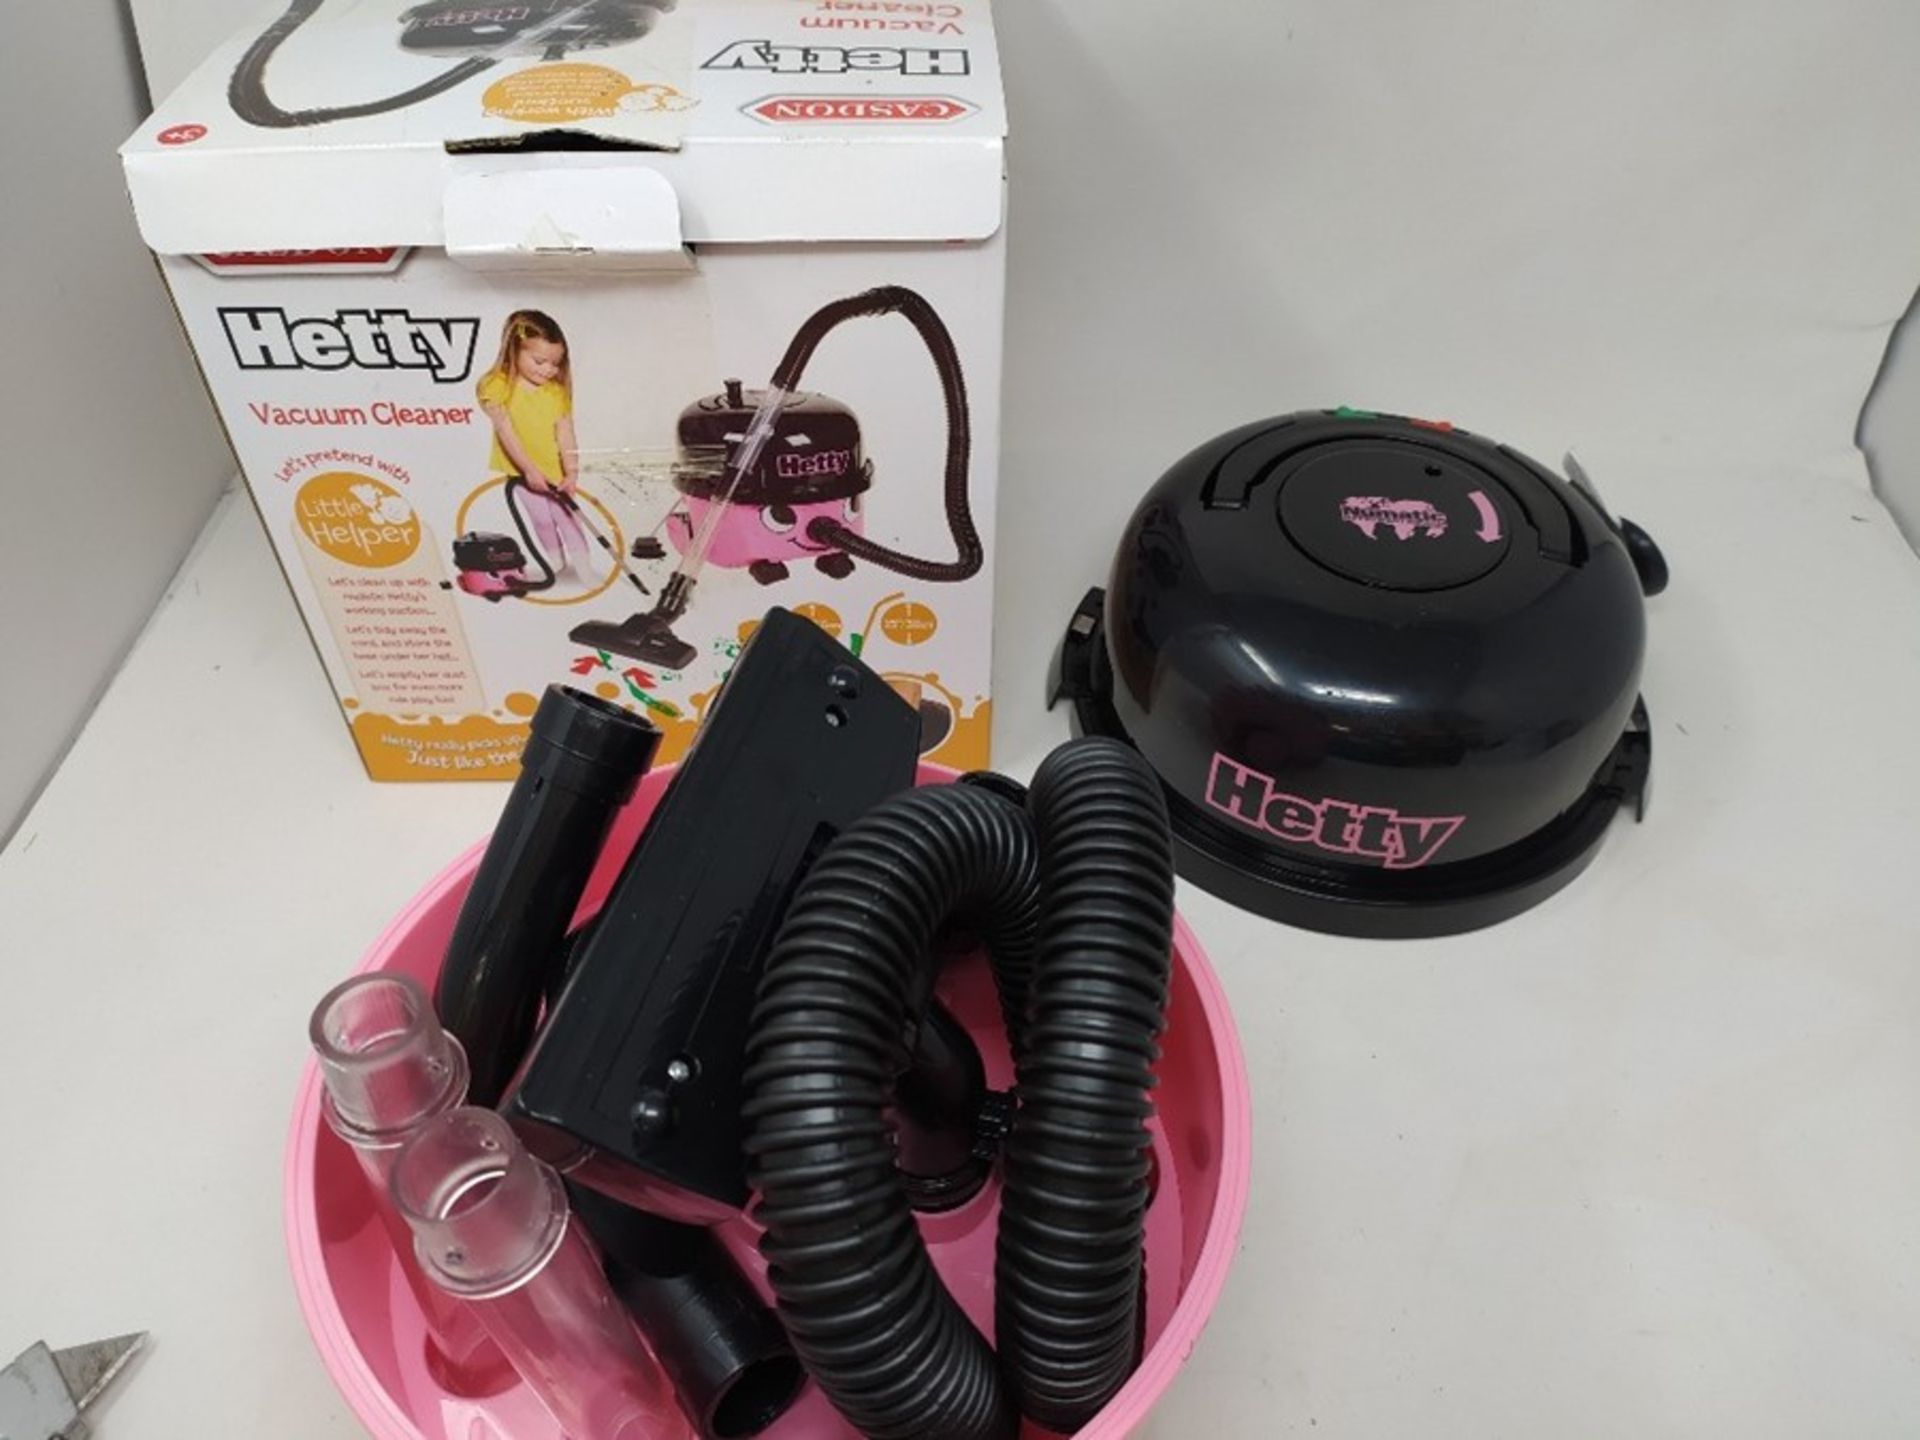 [INCOMPLETE] Casdon plc 729 Casdon Hetty Vacuum Cleaner Toy, Pink - Image 3 of 3